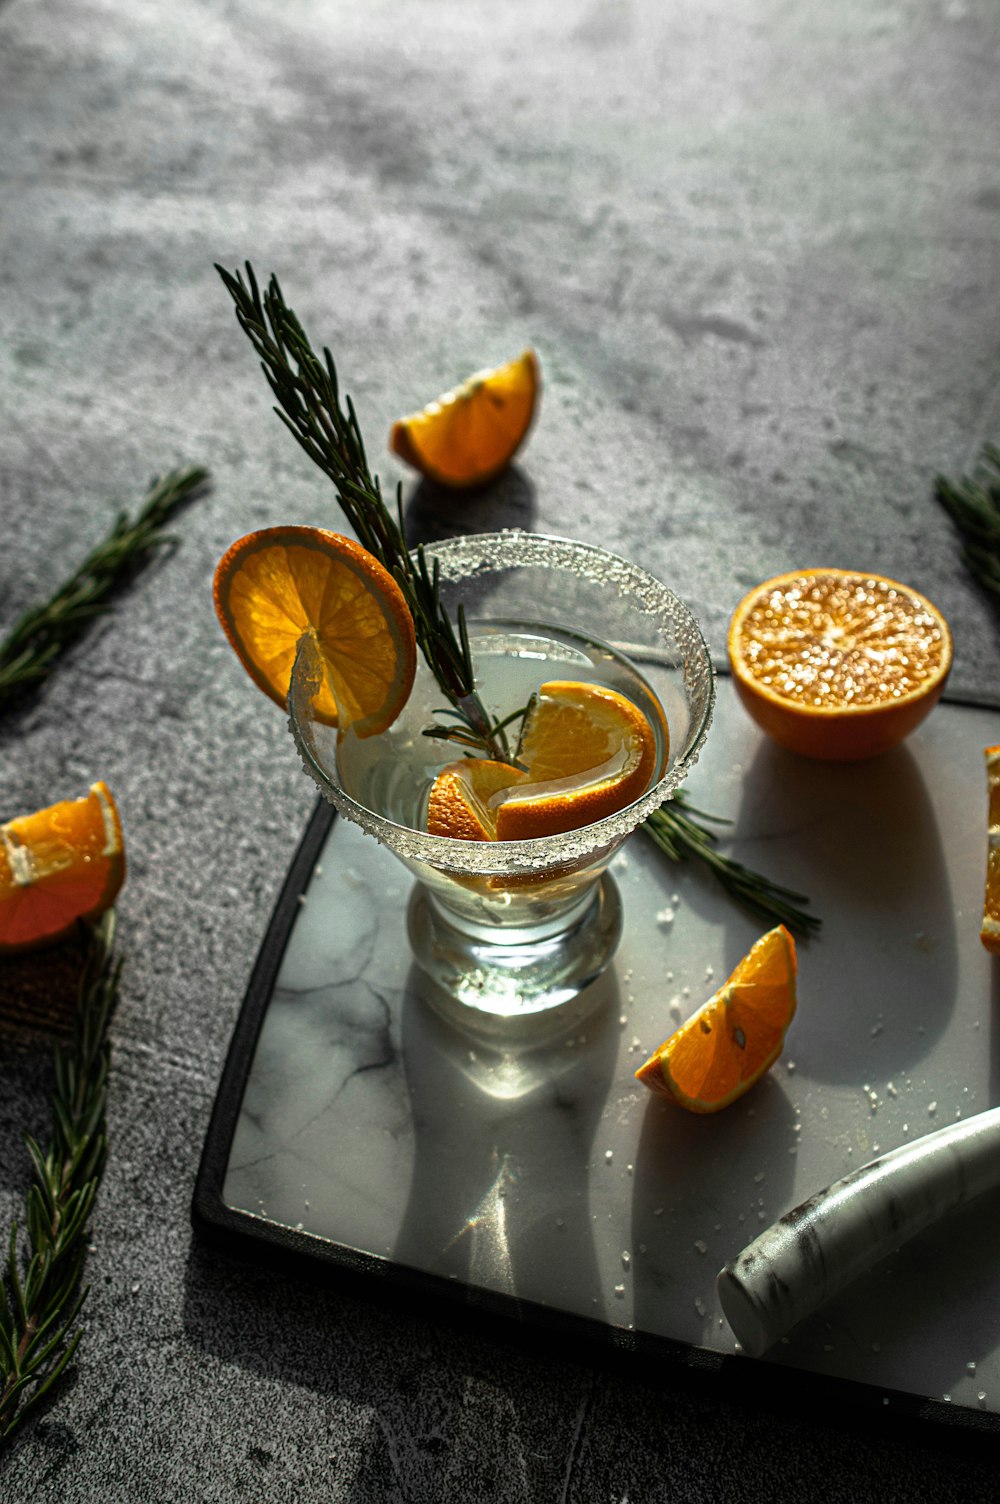 sliced orange fruit on clear glass cup